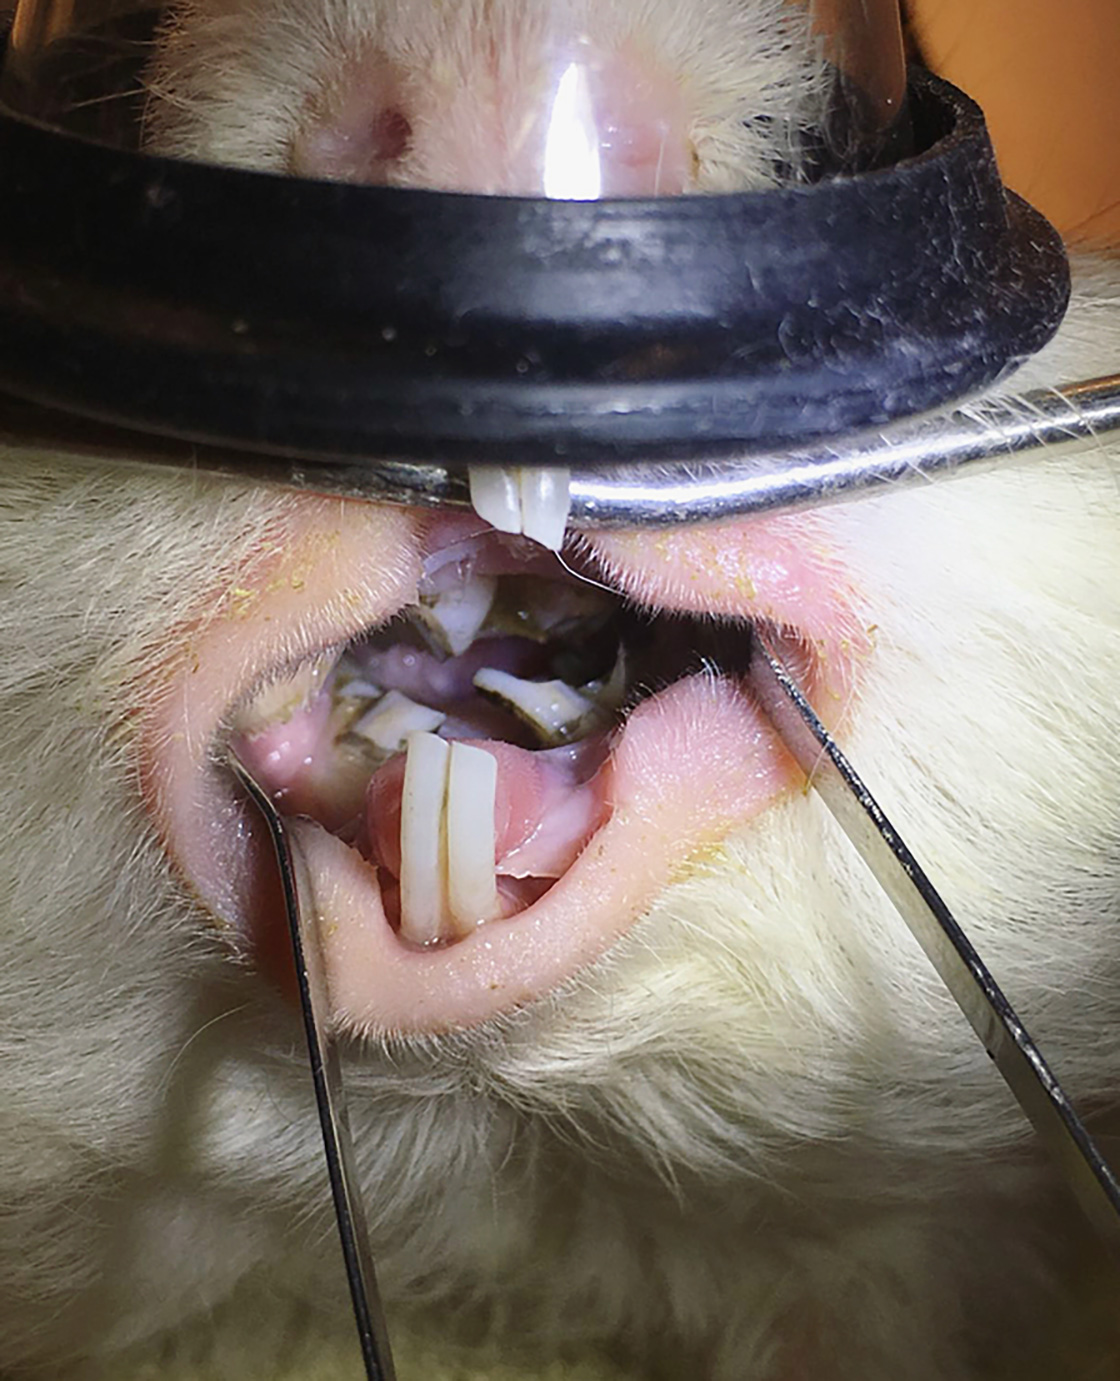 Close-up of a guinea pig's teeth during a dental procedure, with dental instruments in place and the anesthetic mask visible.